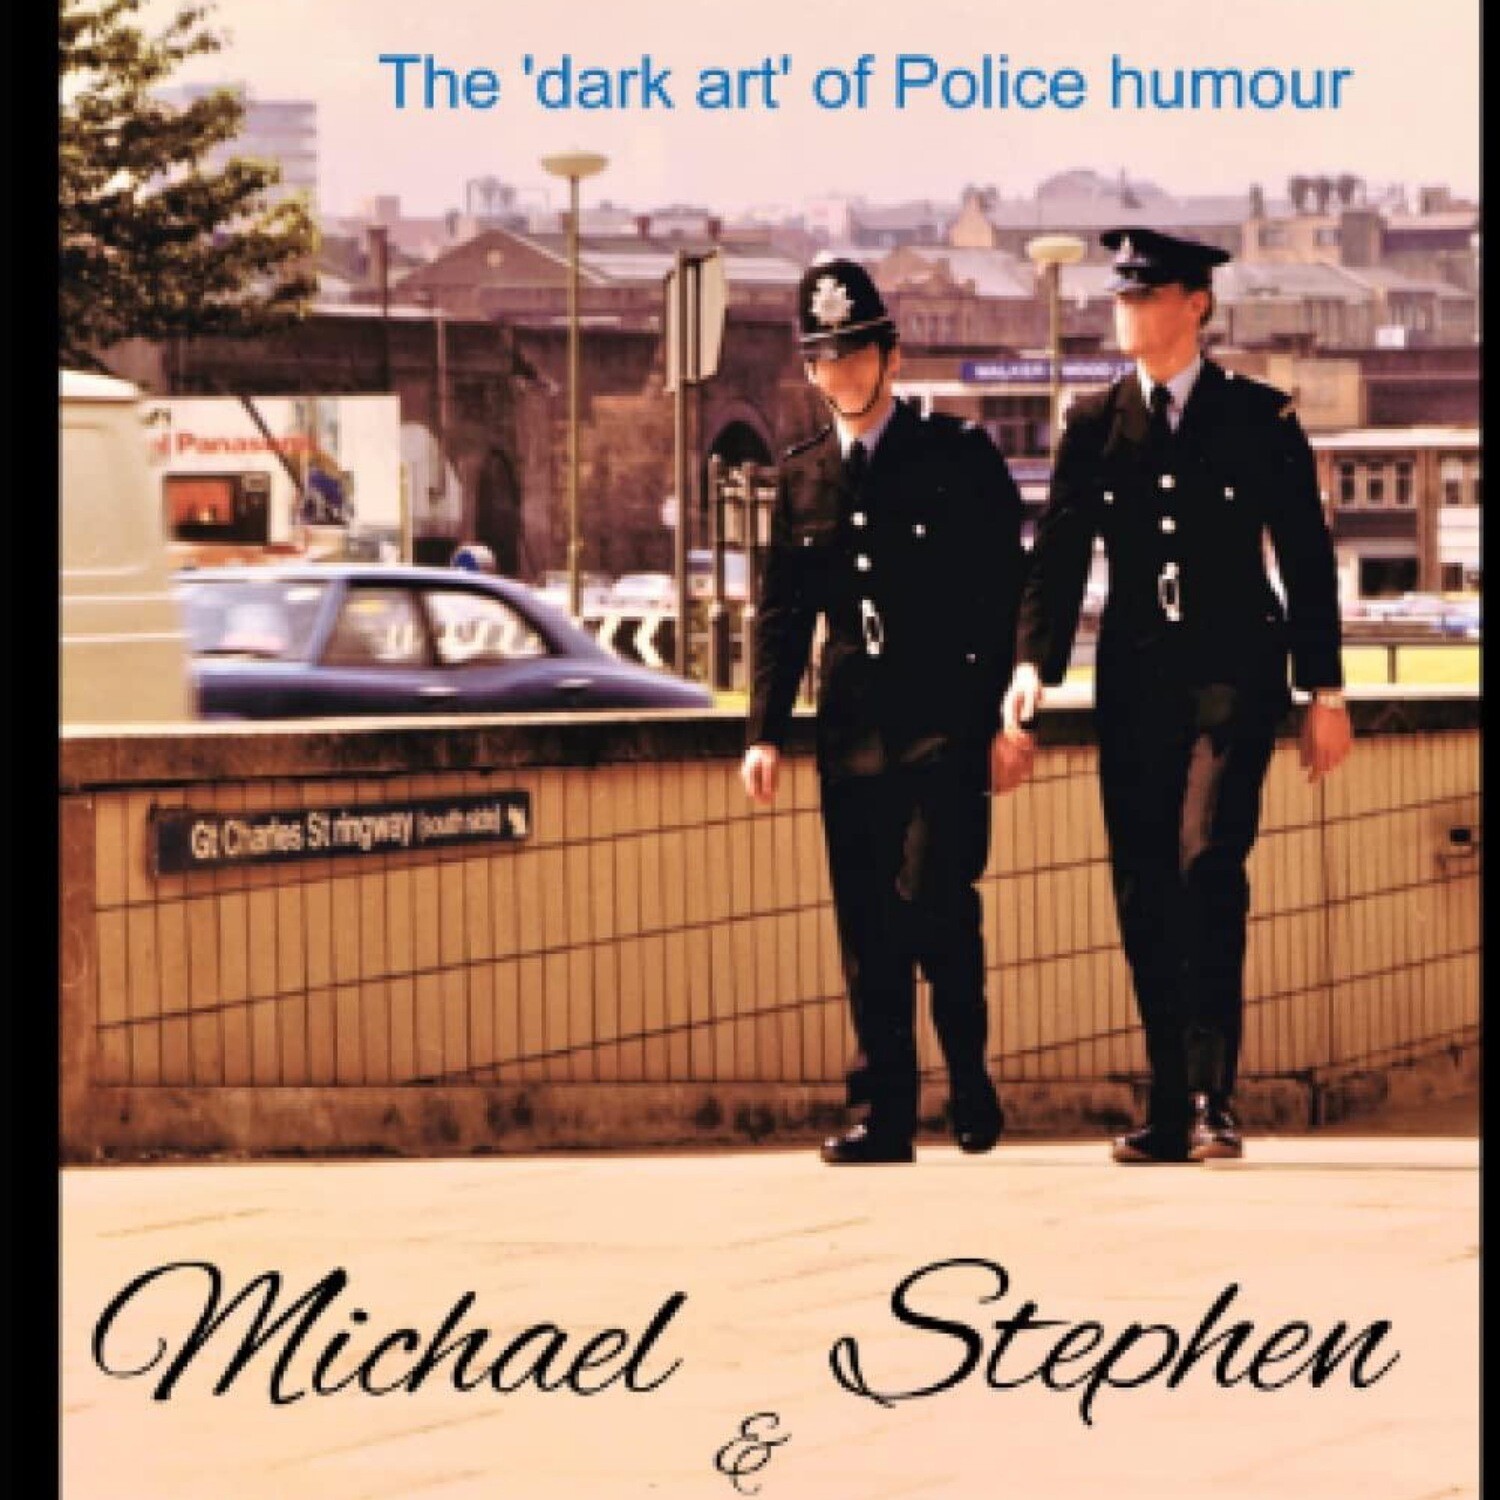 It 's a Blag: The ' Dark Art ' of Police Humour